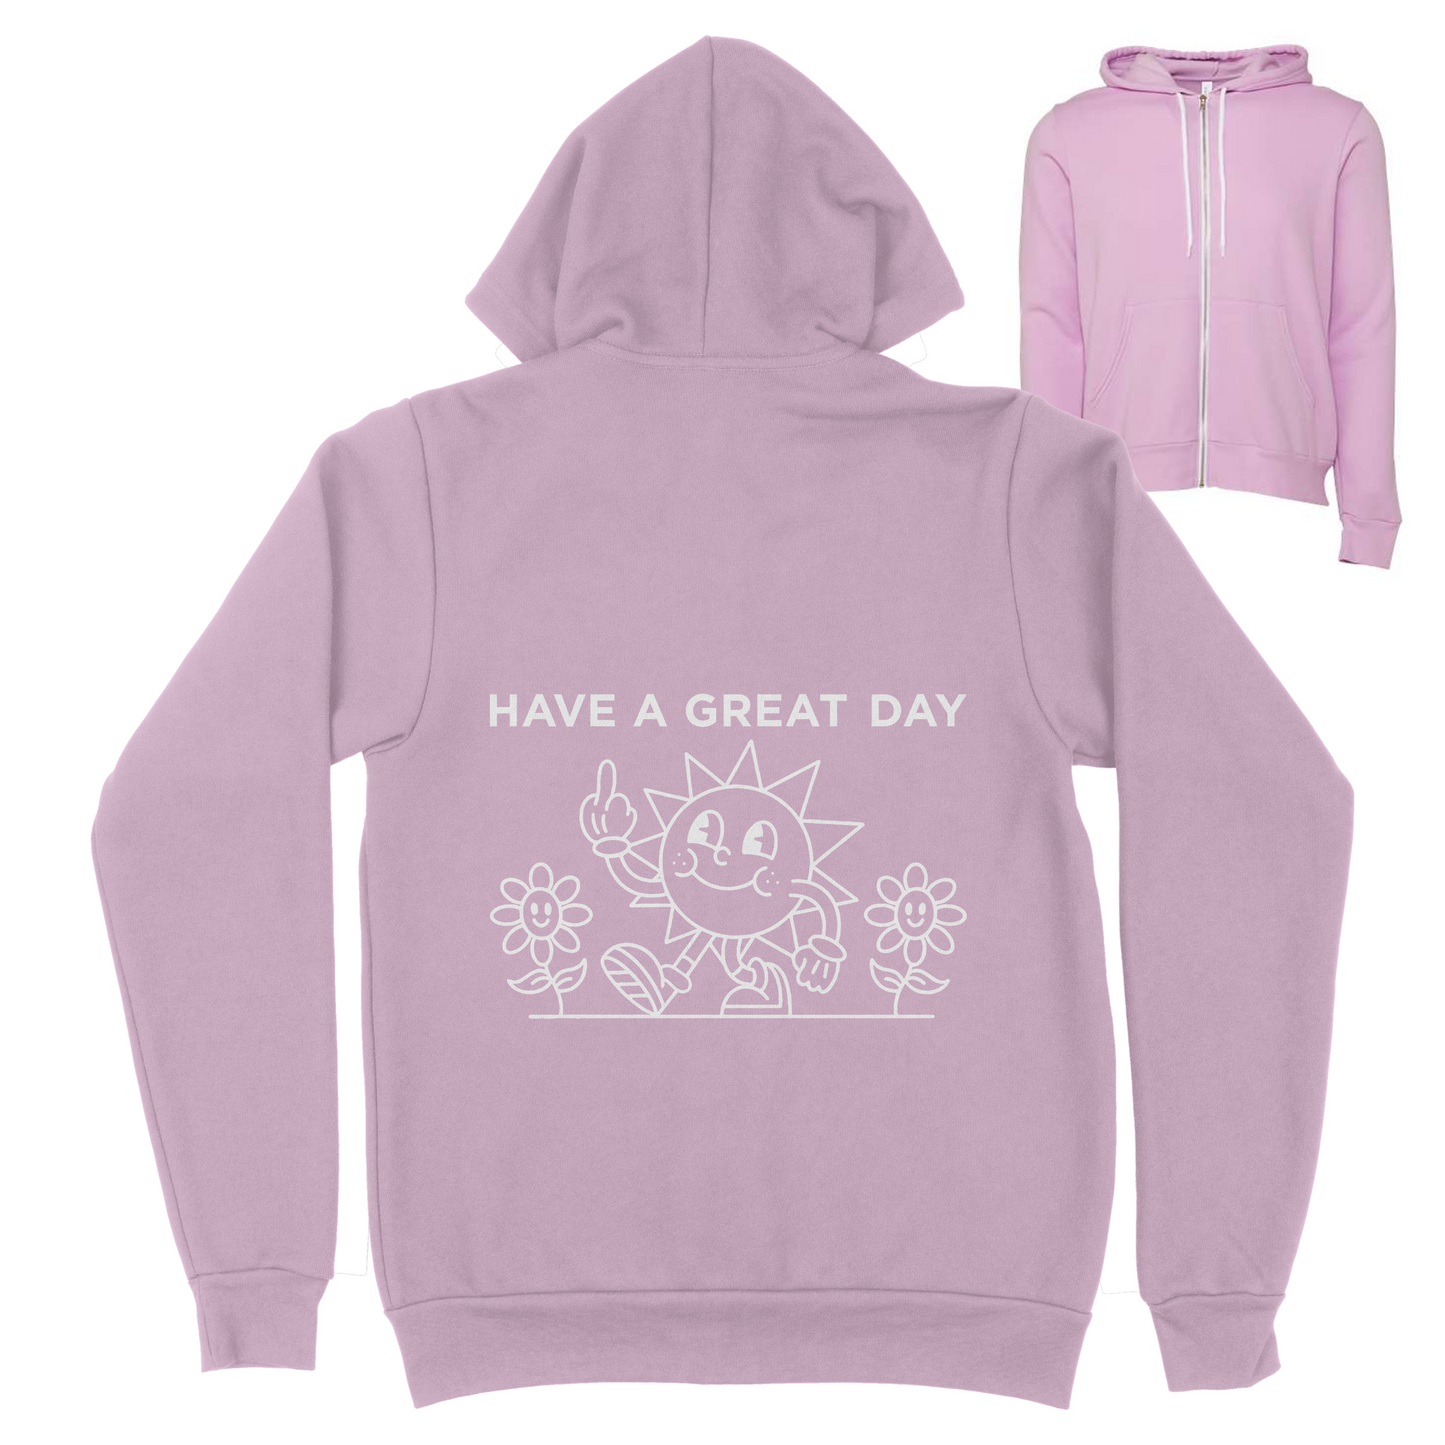 Have A Great Day Zip Up Hoodie